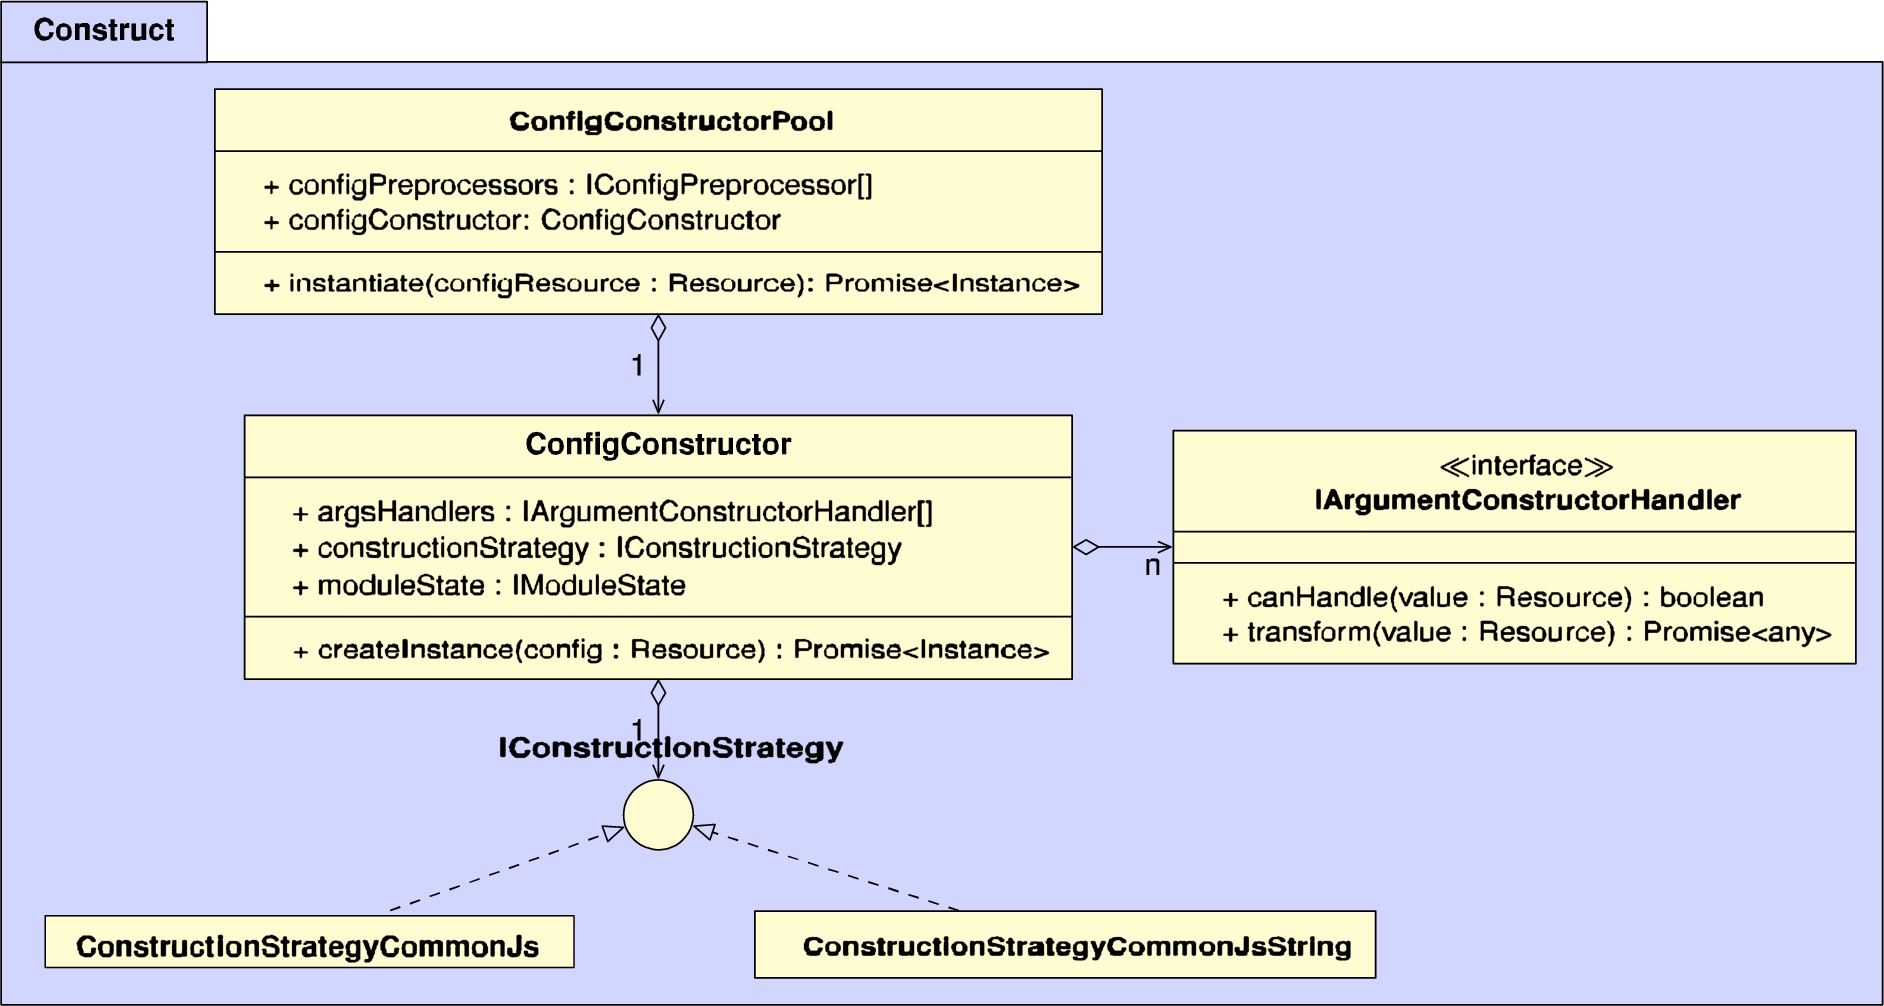 UML diagram of the classes within the construct package, which are responsible for instantiating configs according to a certain strategy.